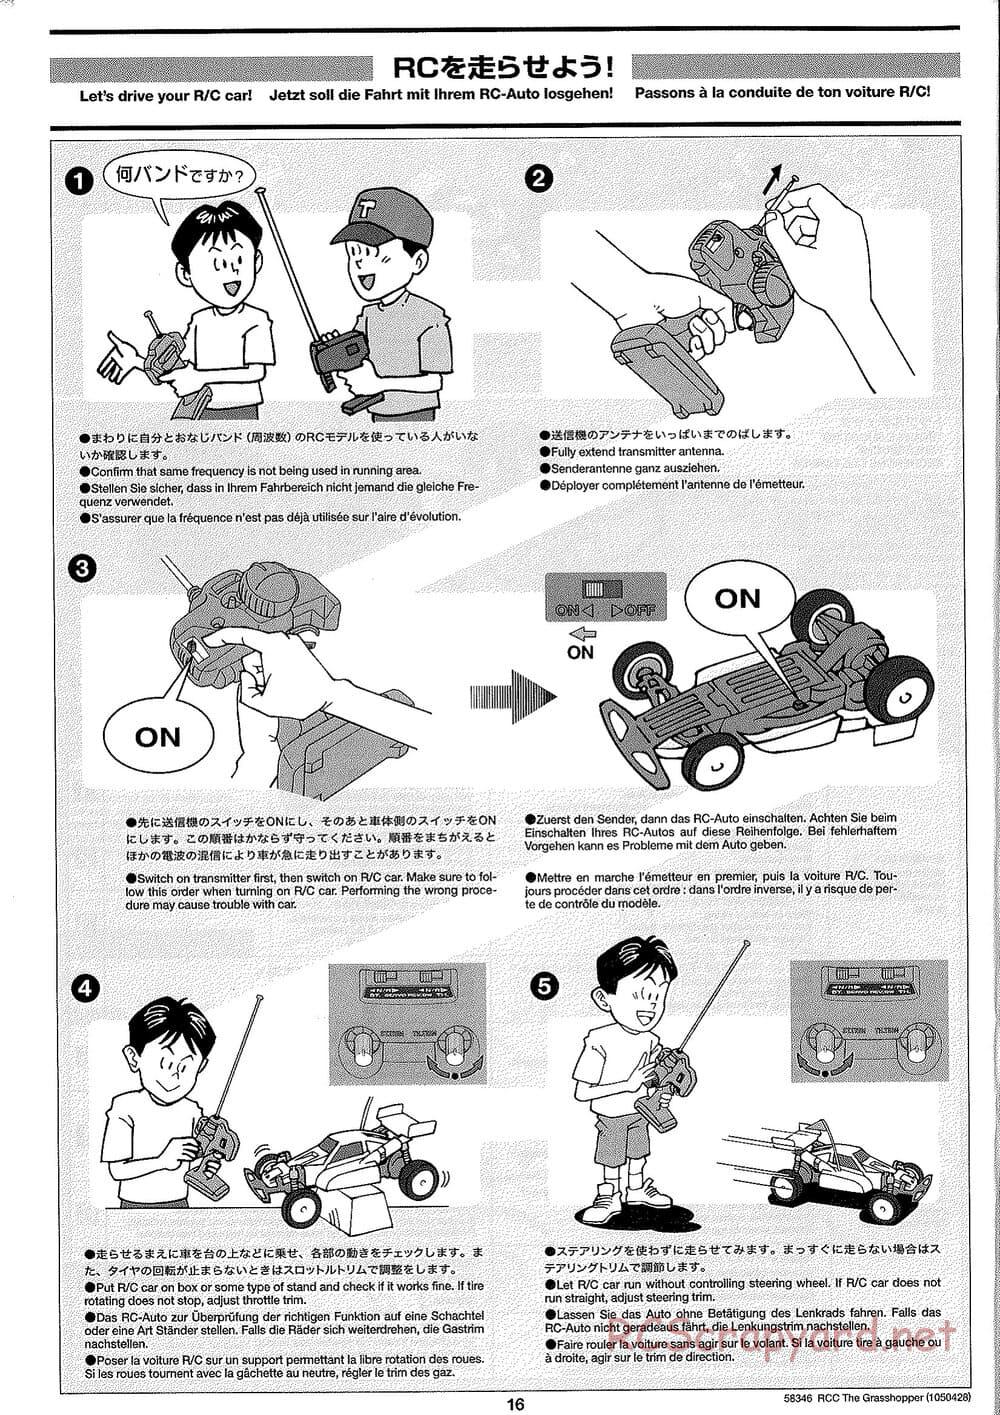 Tamiya - The Grasshopper (2005) - GH Chassis - Manual - Page 16